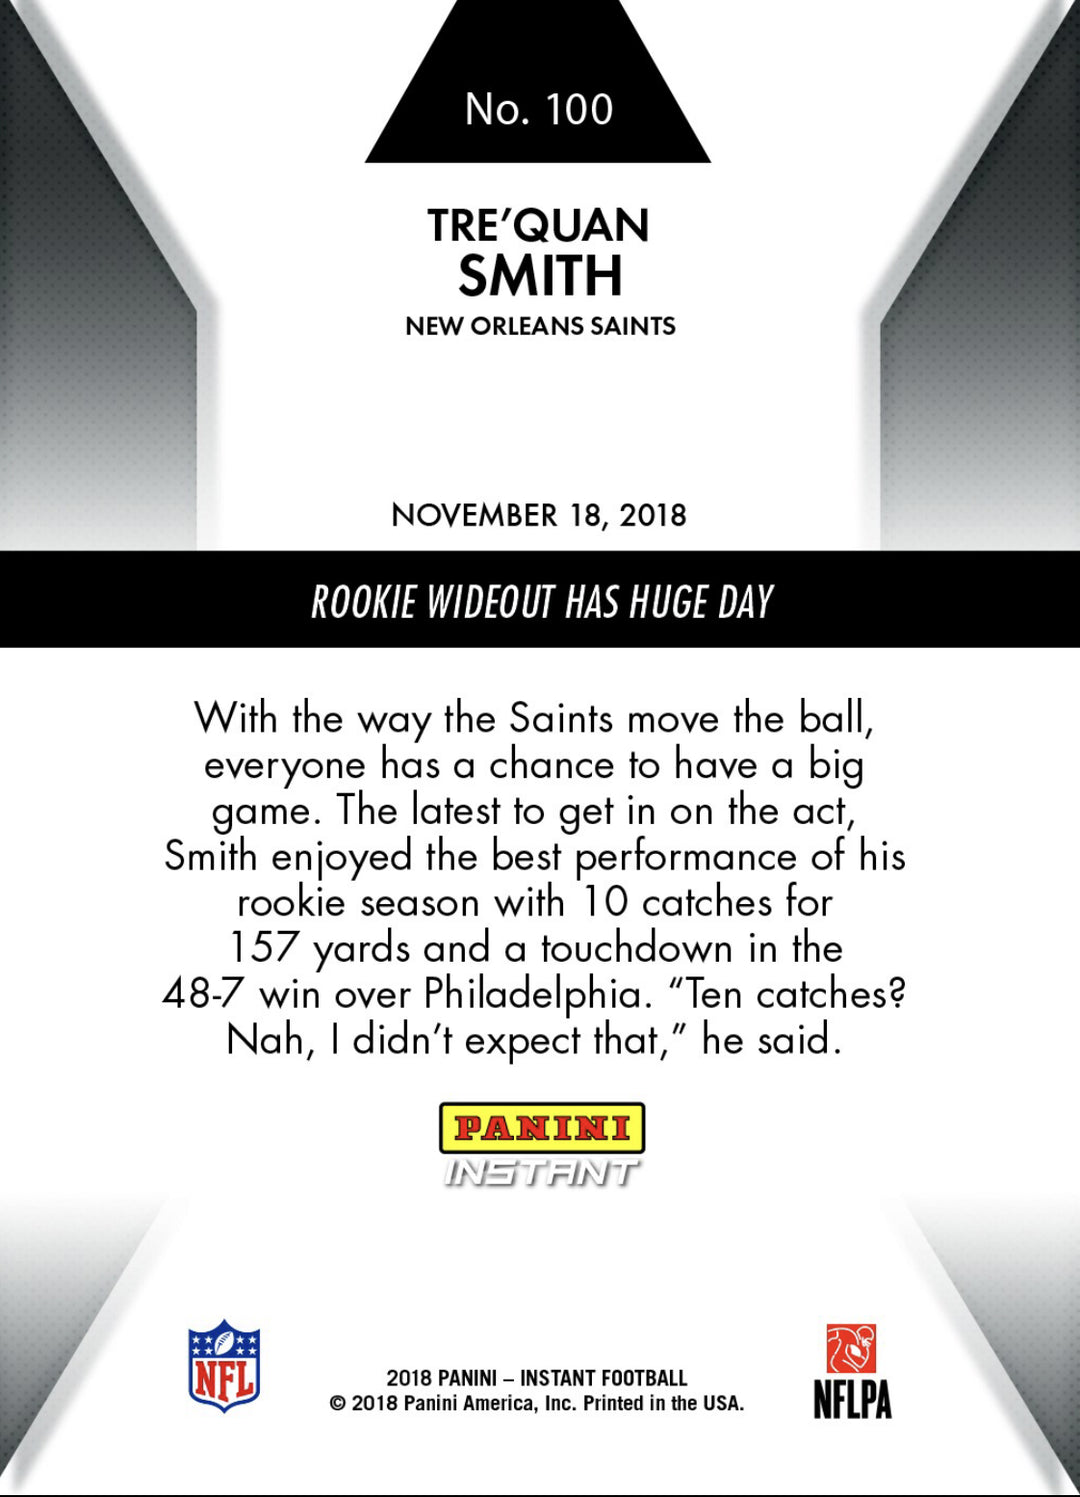 2018 TRE'QUAN SMITH ROOKIE WIDEOUT HAS HUGE DAY PANINI INSTANT SAINTS CARD #100 Image 11